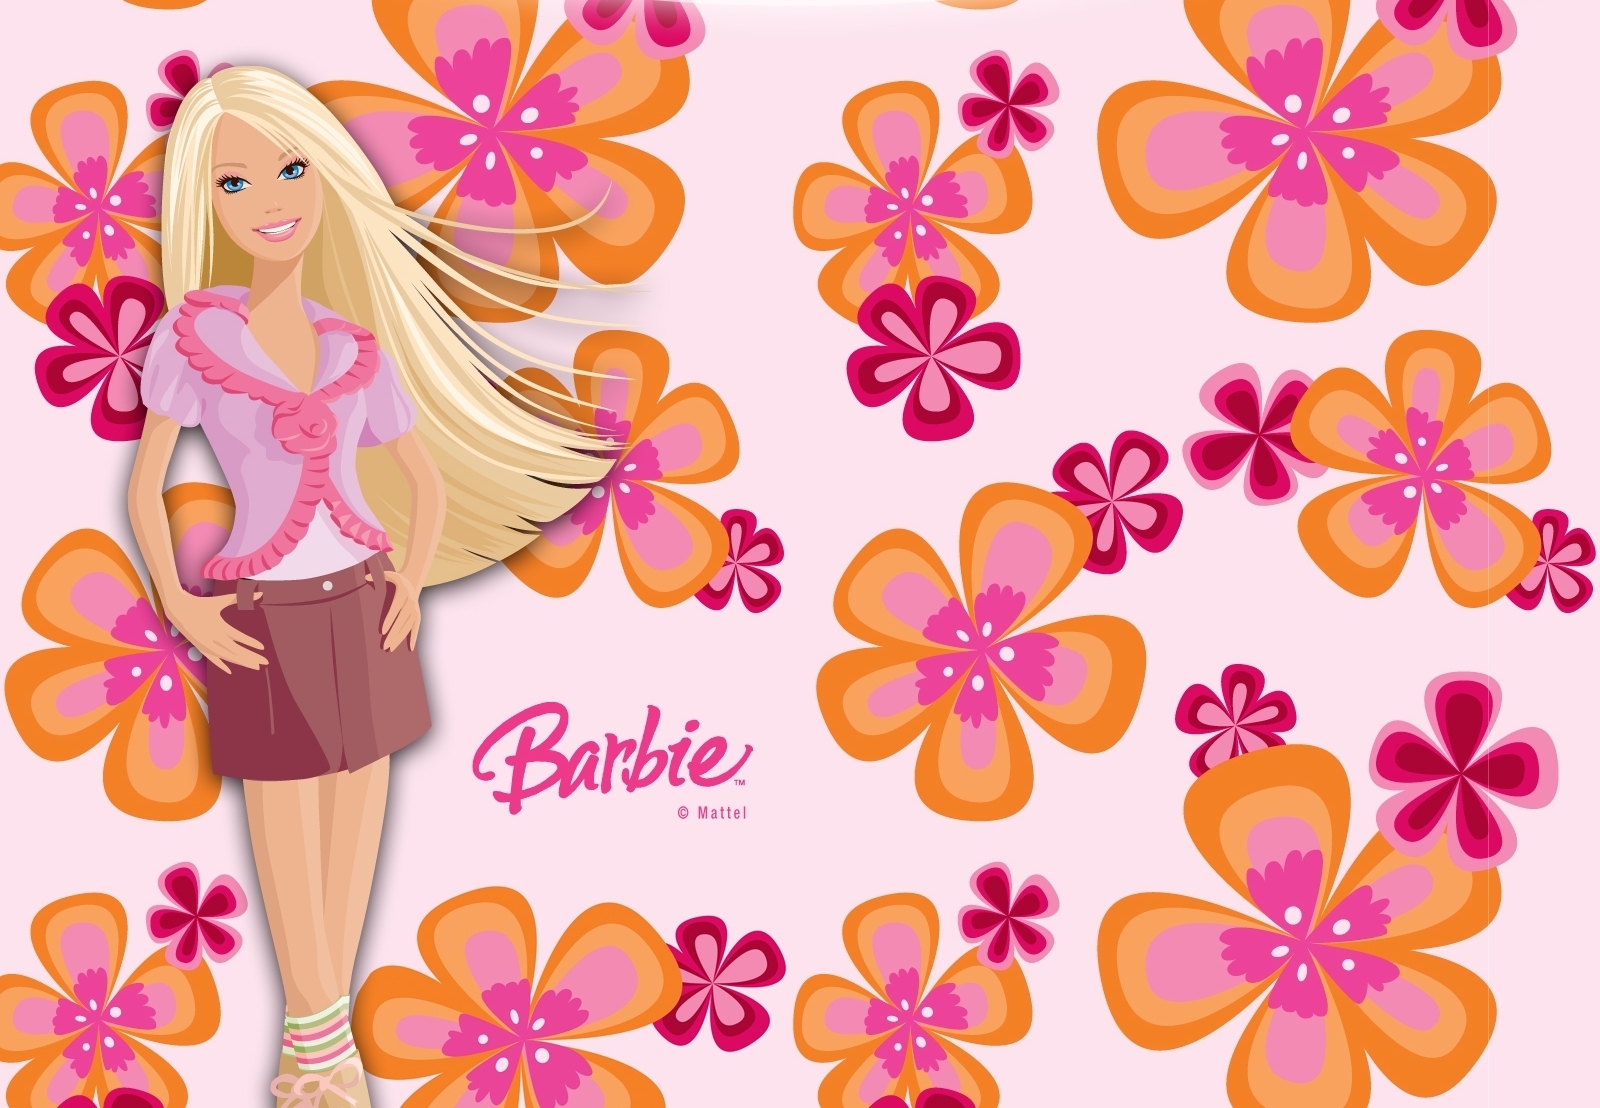 Sisters Pets And Friends Image Barbie Flower Wallpaper HD